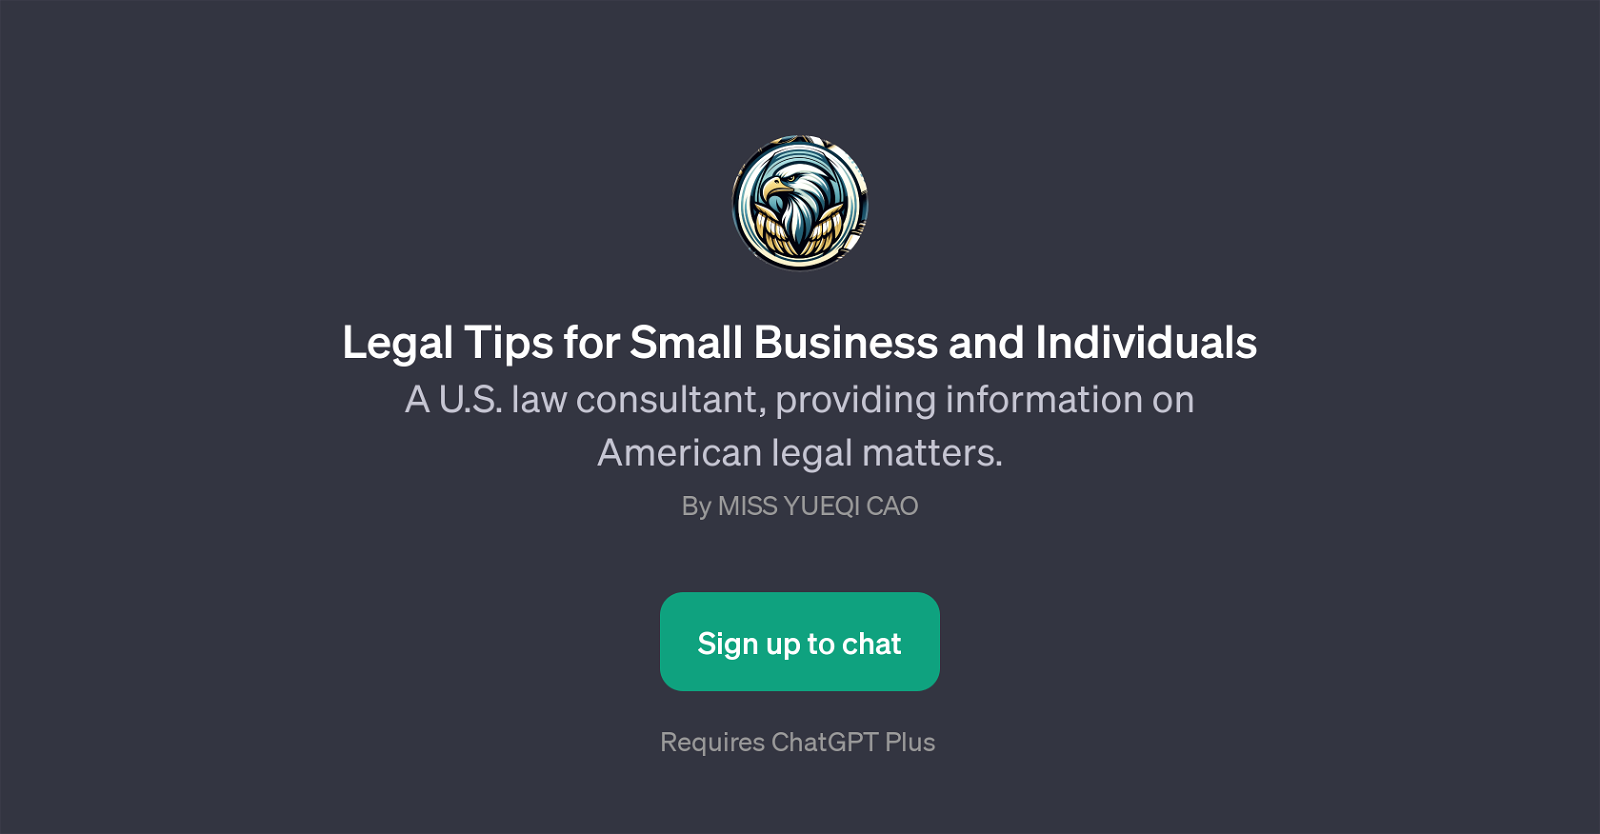 Legal Tips for Small Business and Individuals website